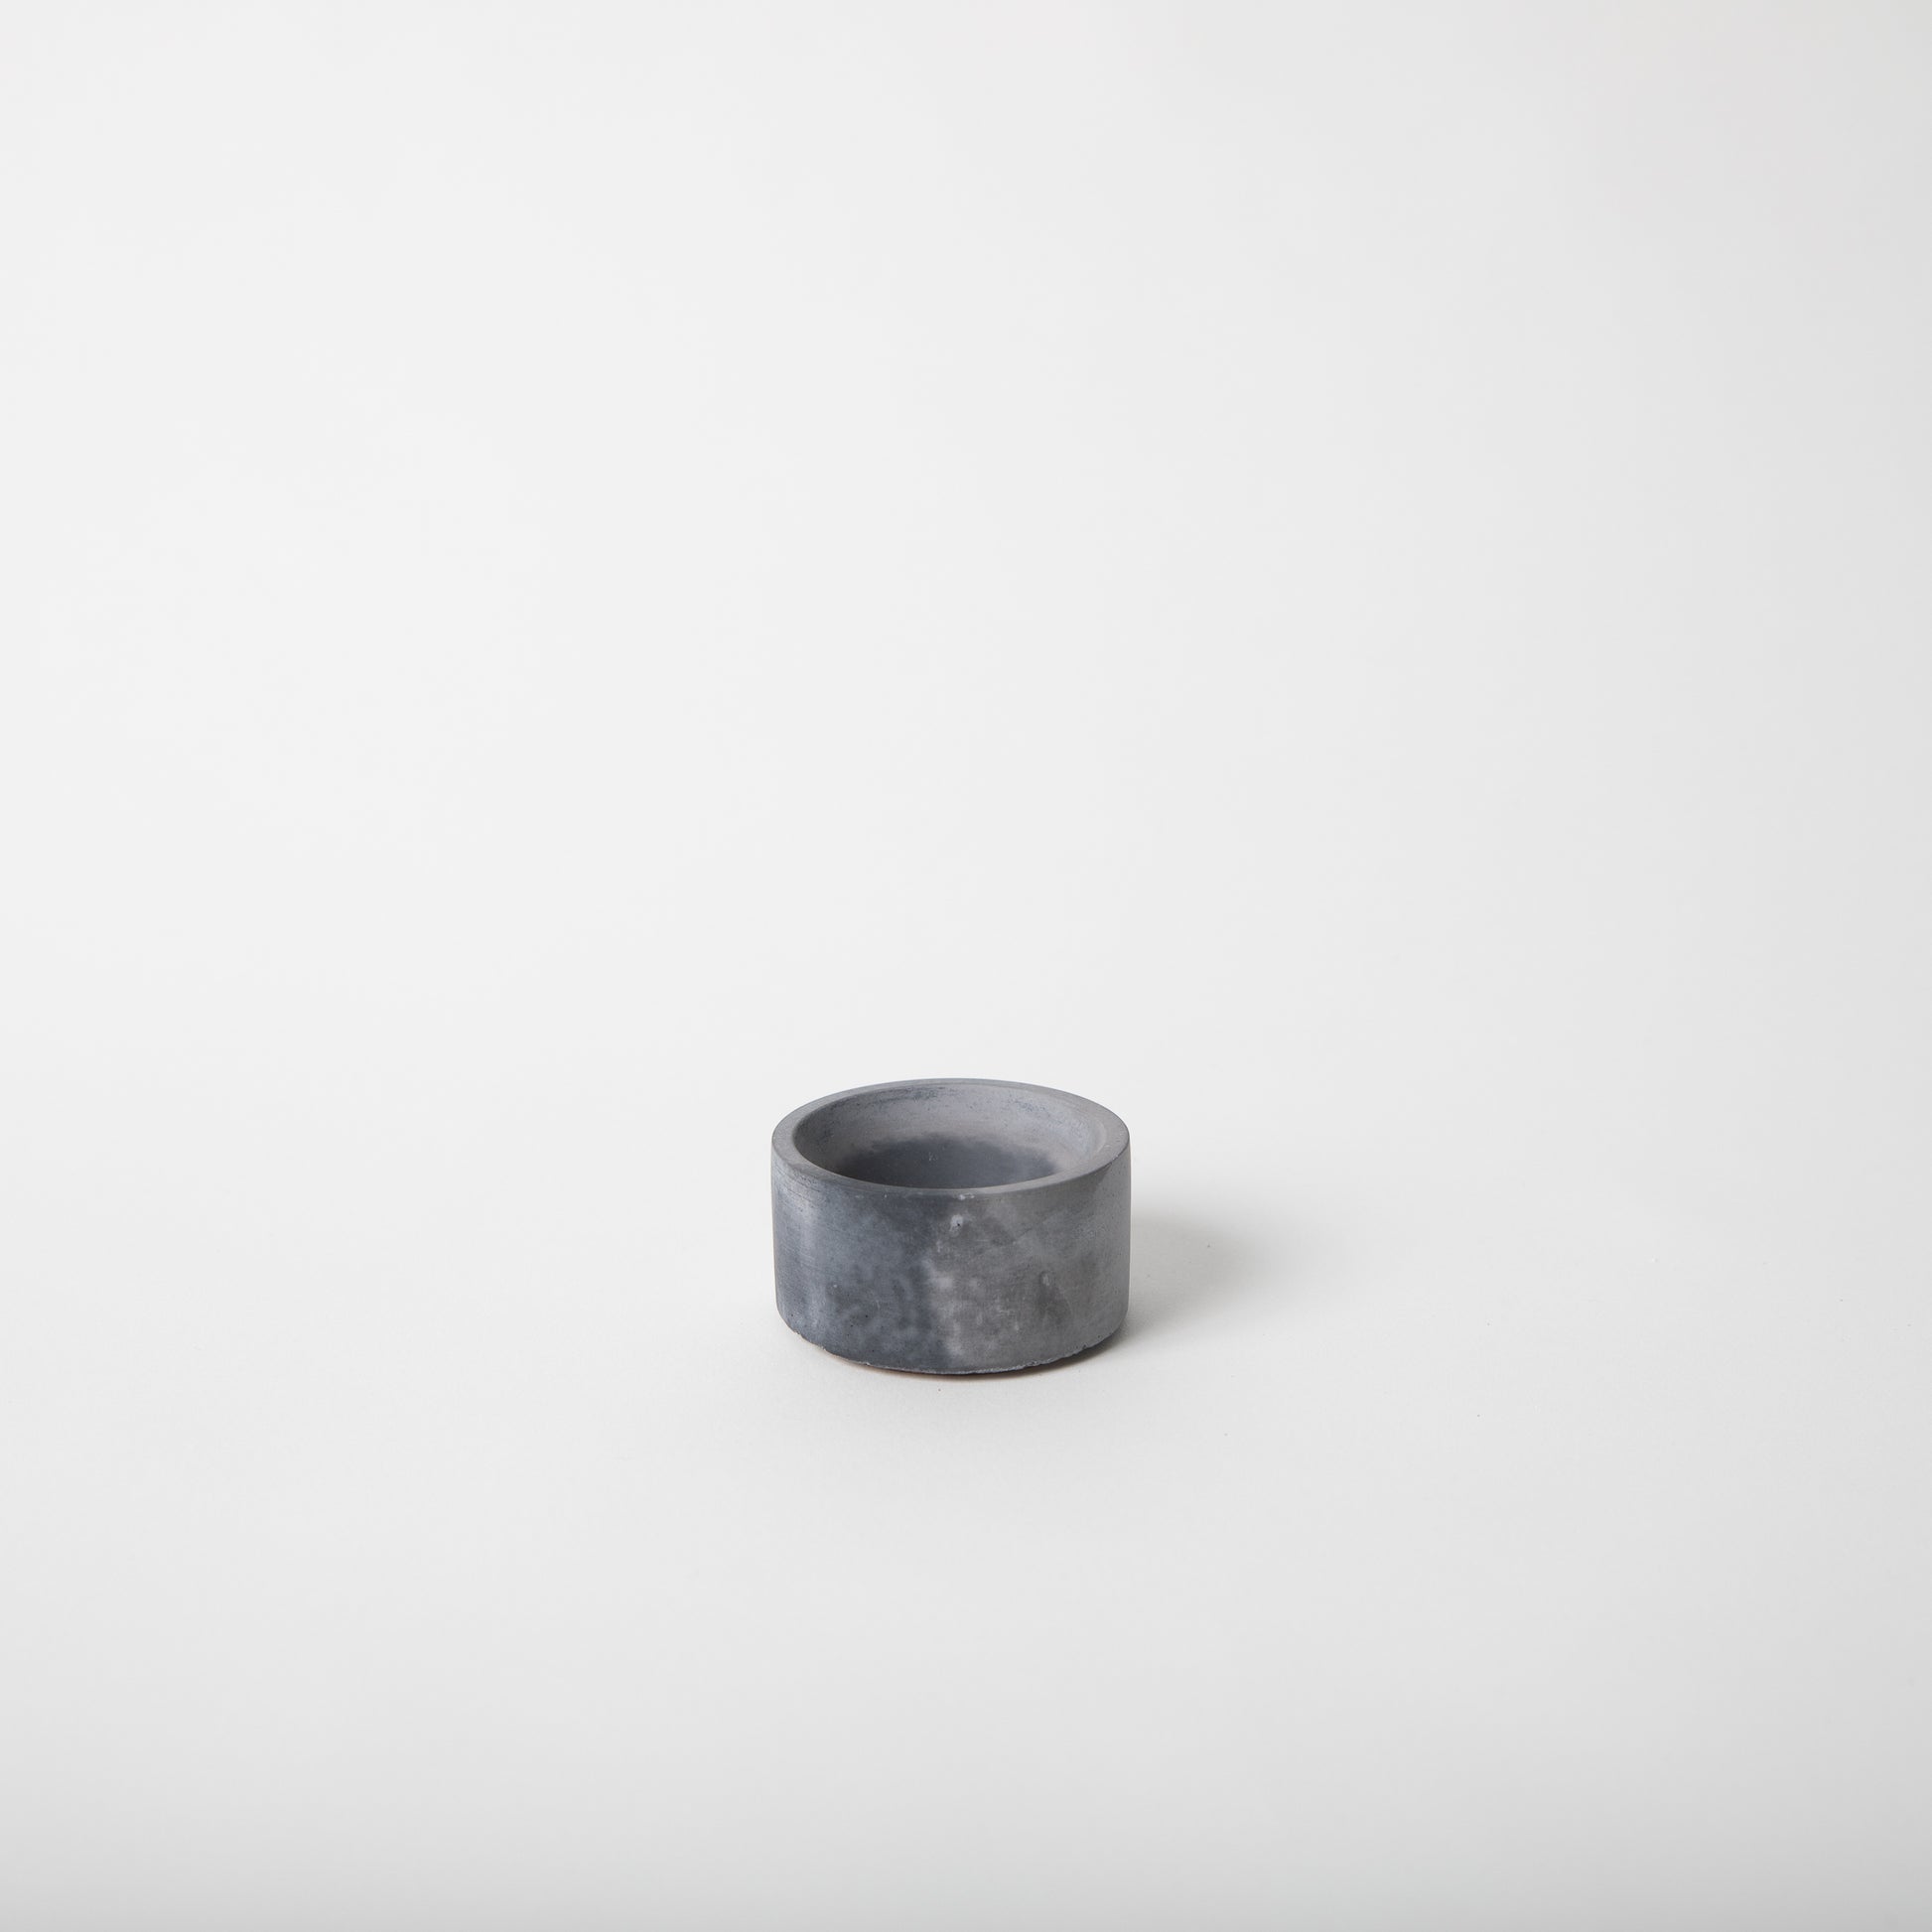 Round concrete incense holder in black and grey.